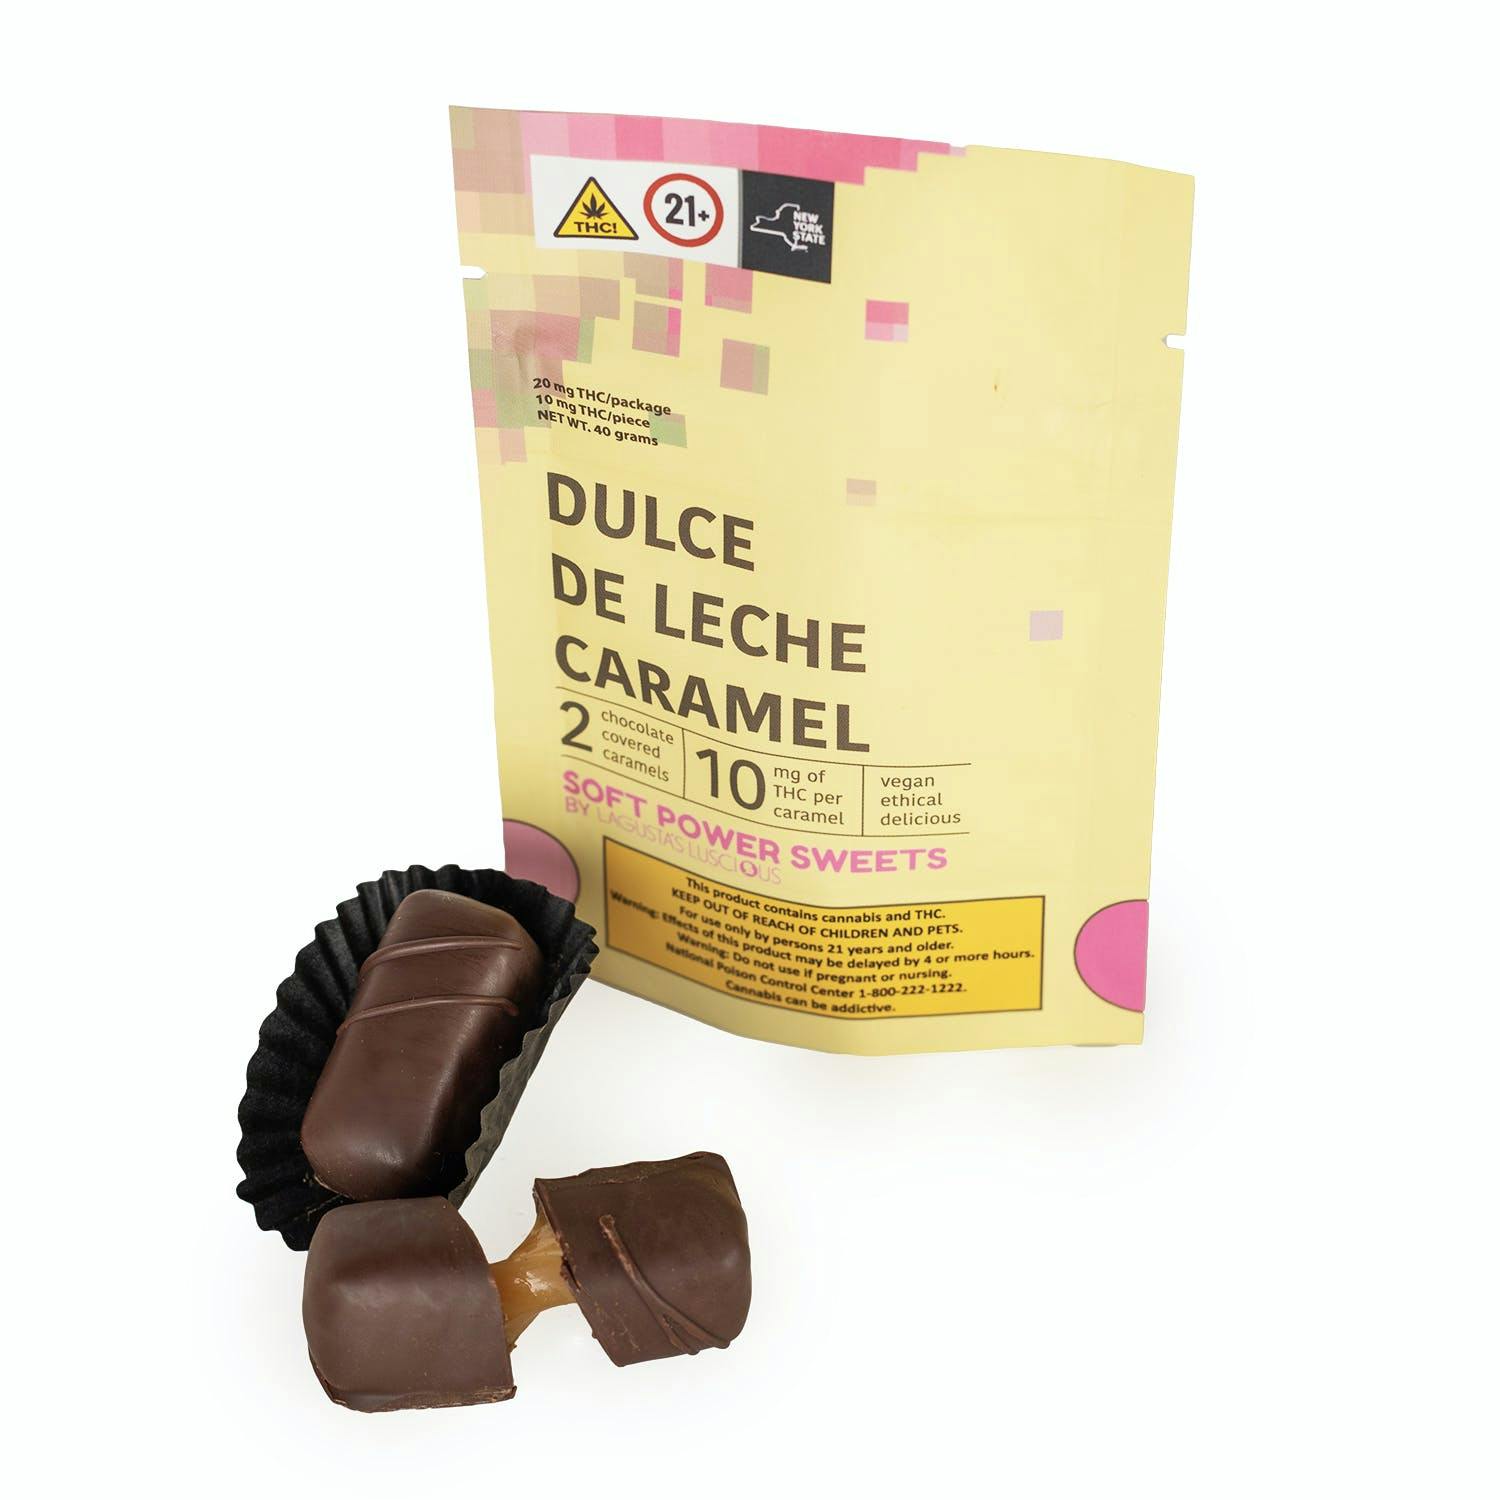 Dulce De Leche Caramel Chocolates • 2 Pack - Soft Power Sweets | Treehouse Cannabis - Weed delivery for New York